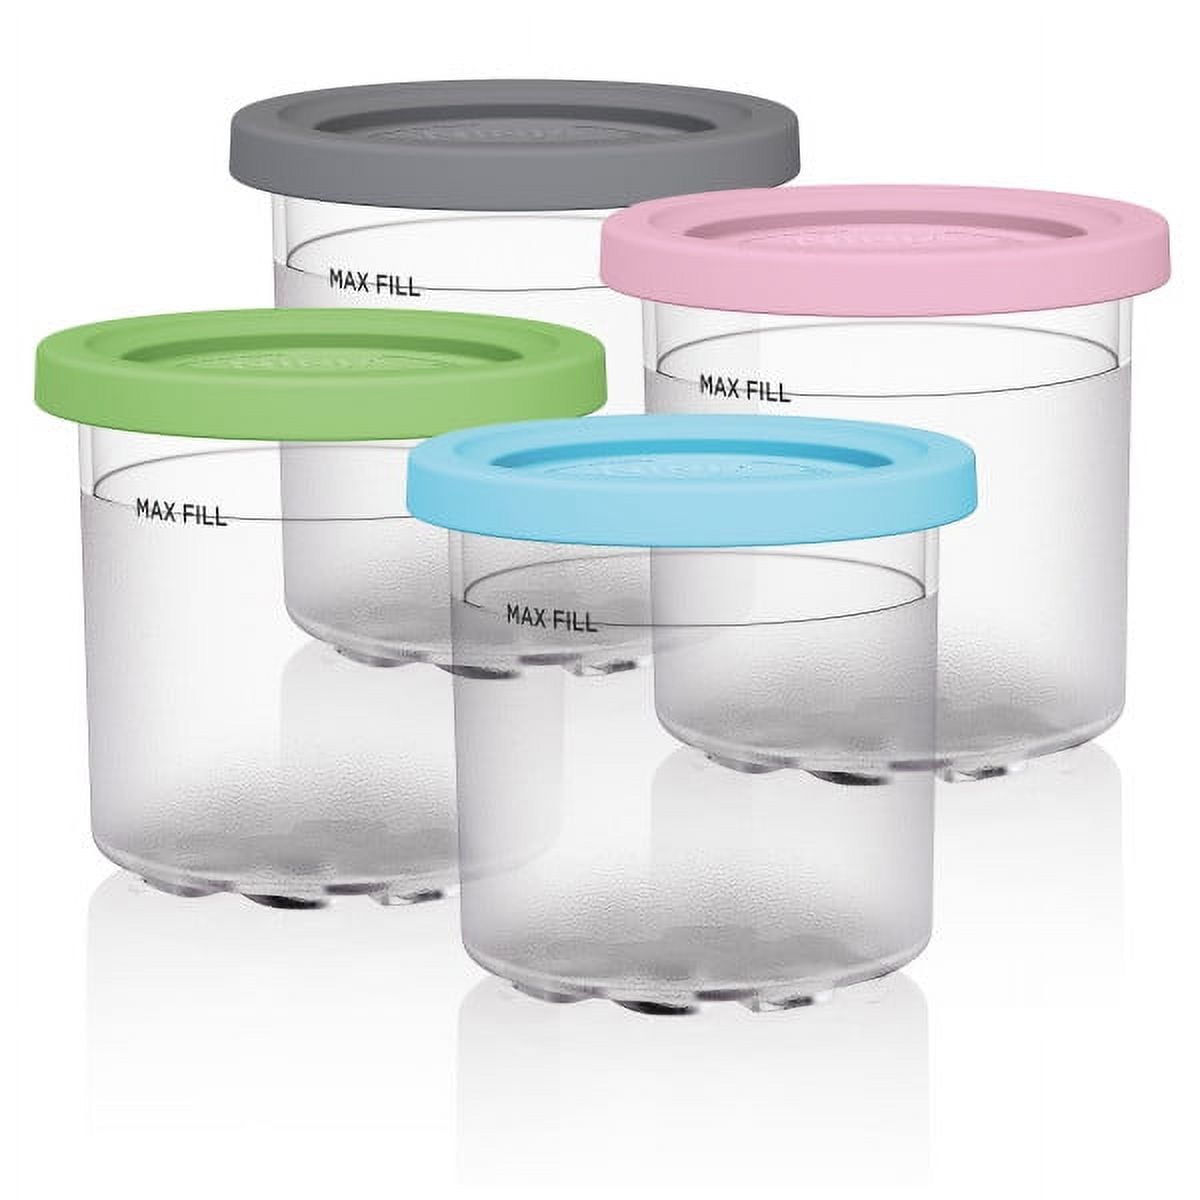 Ninja CREAMi Breeze Containers: Stock Up On Your Pints!